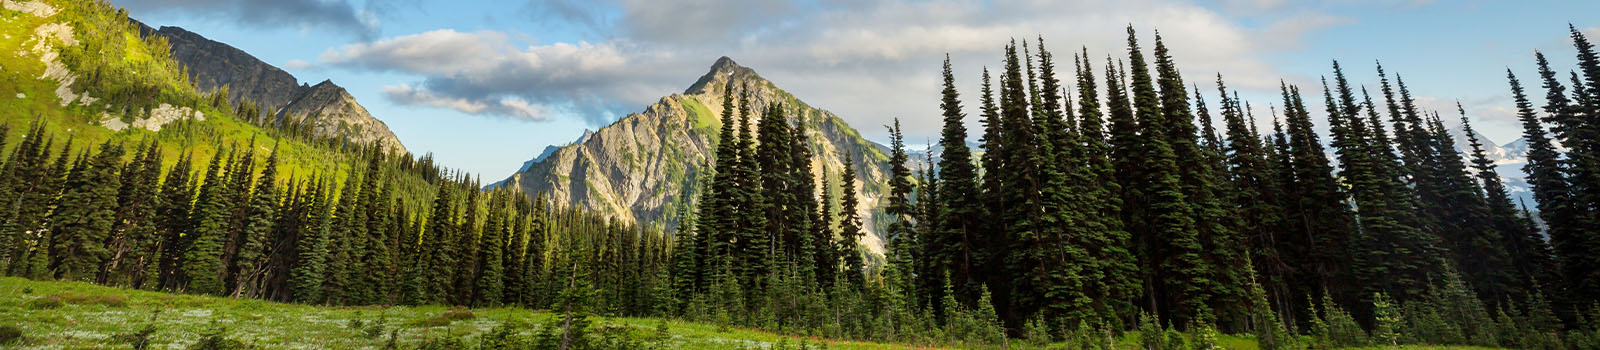 Mountain peak in washington state lined with trees